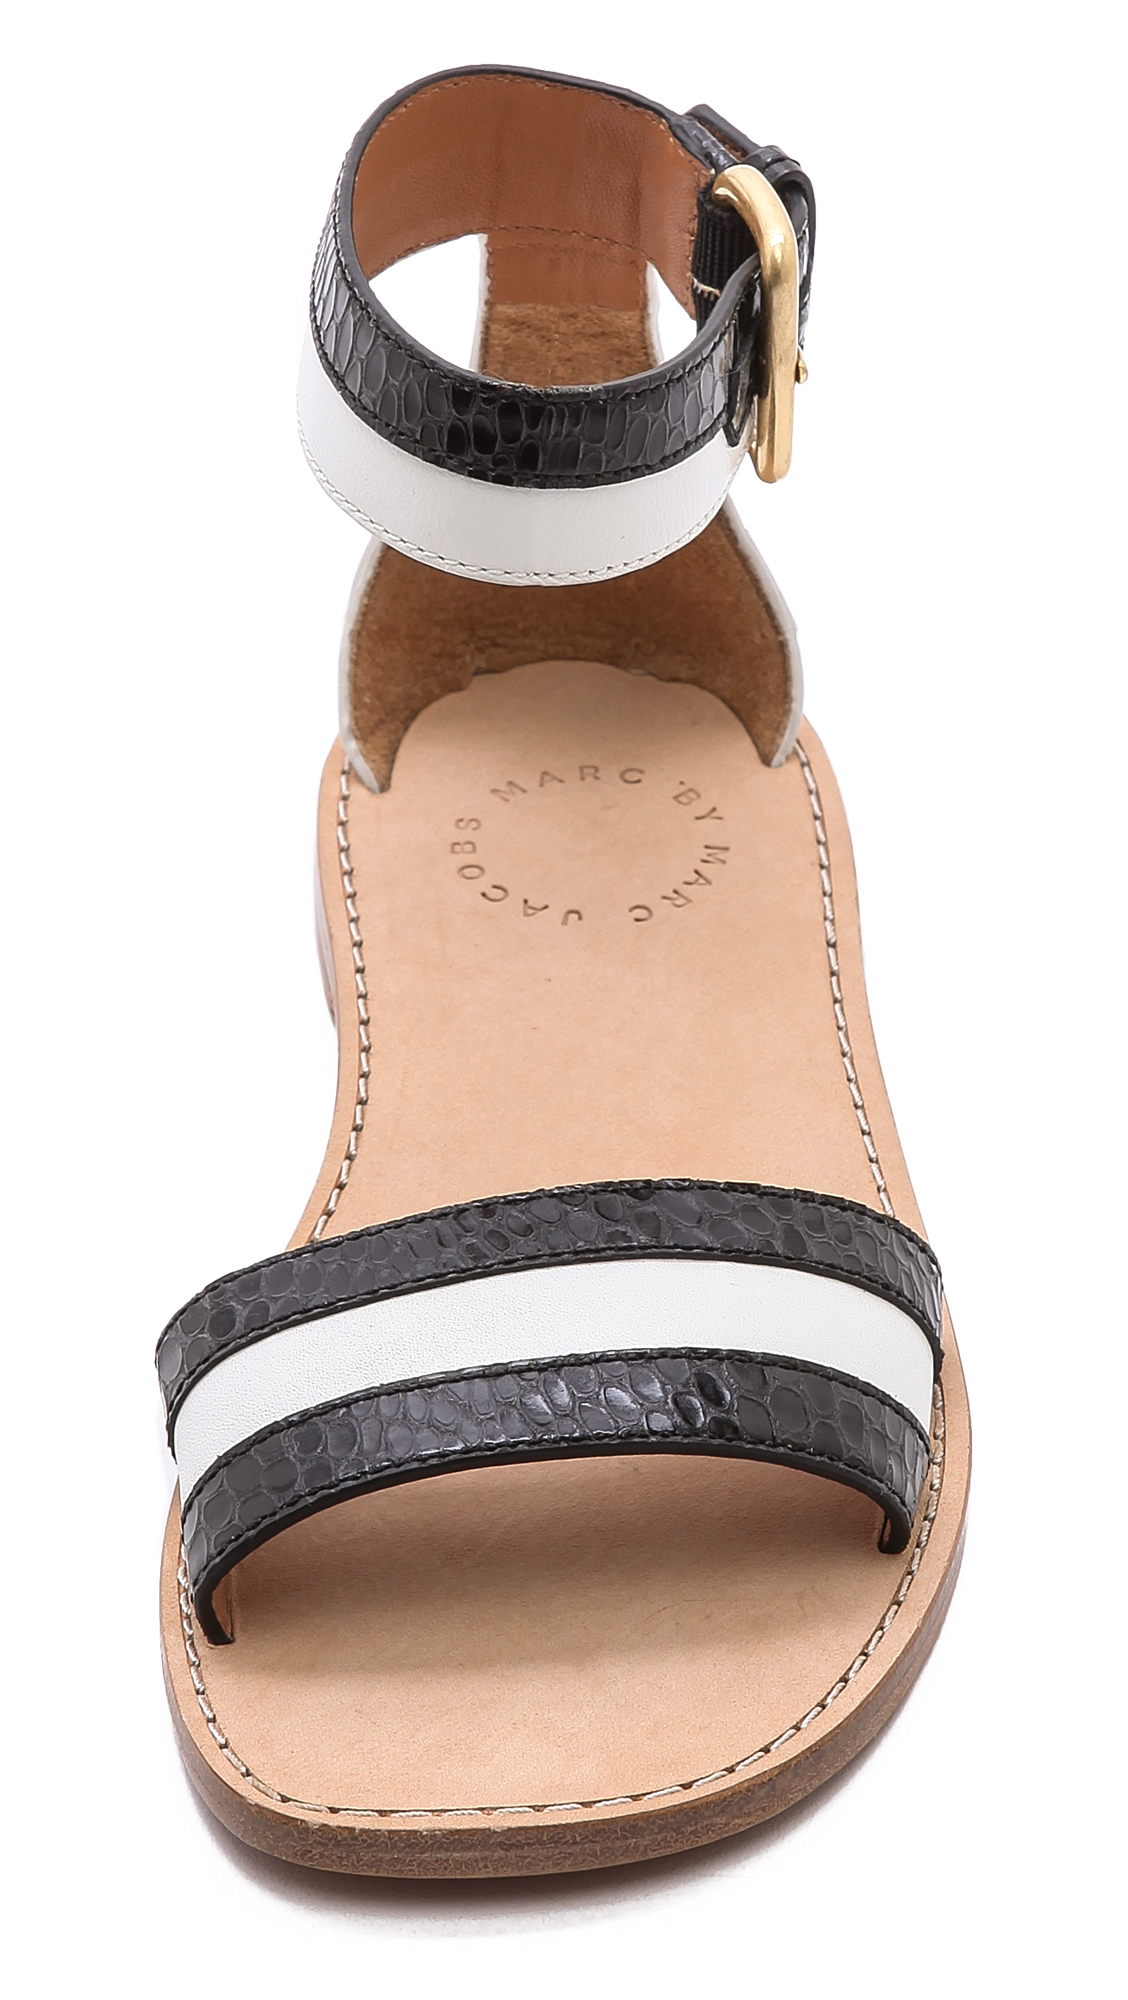 Marc By Marc Jacobs Striped Flat Sandals  Ivoryblack Lyst